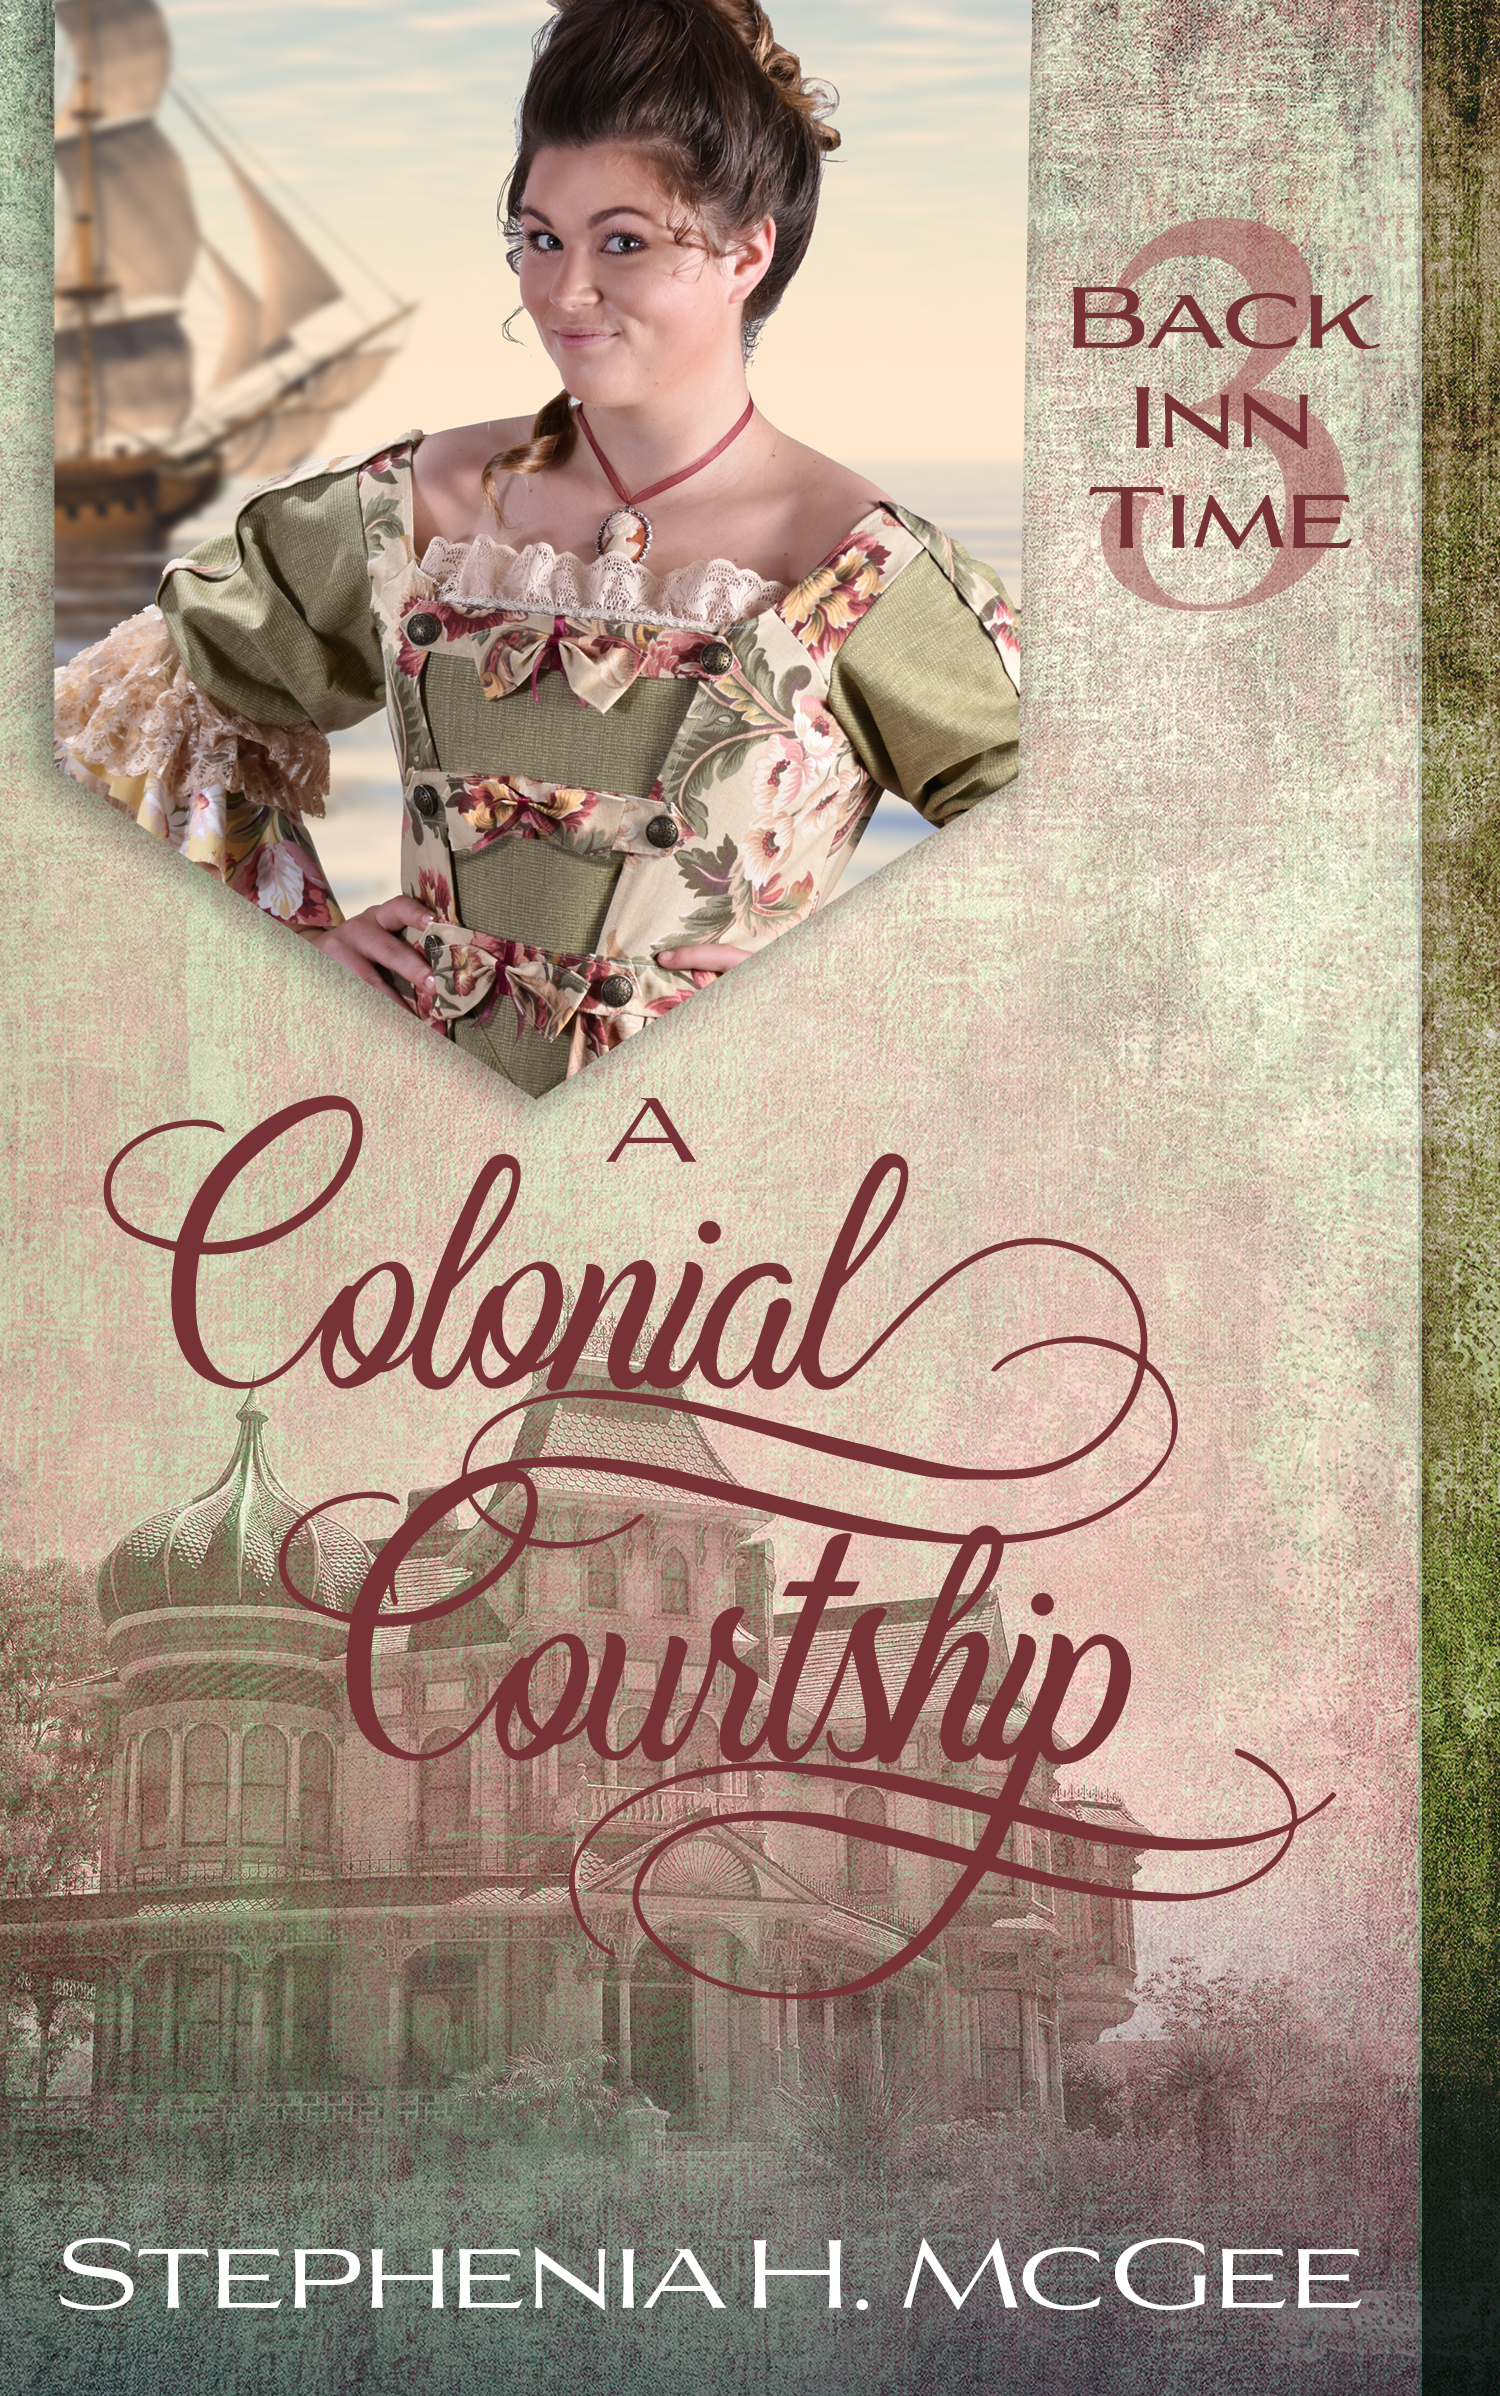 Featured image for “A Colonial Courtship”